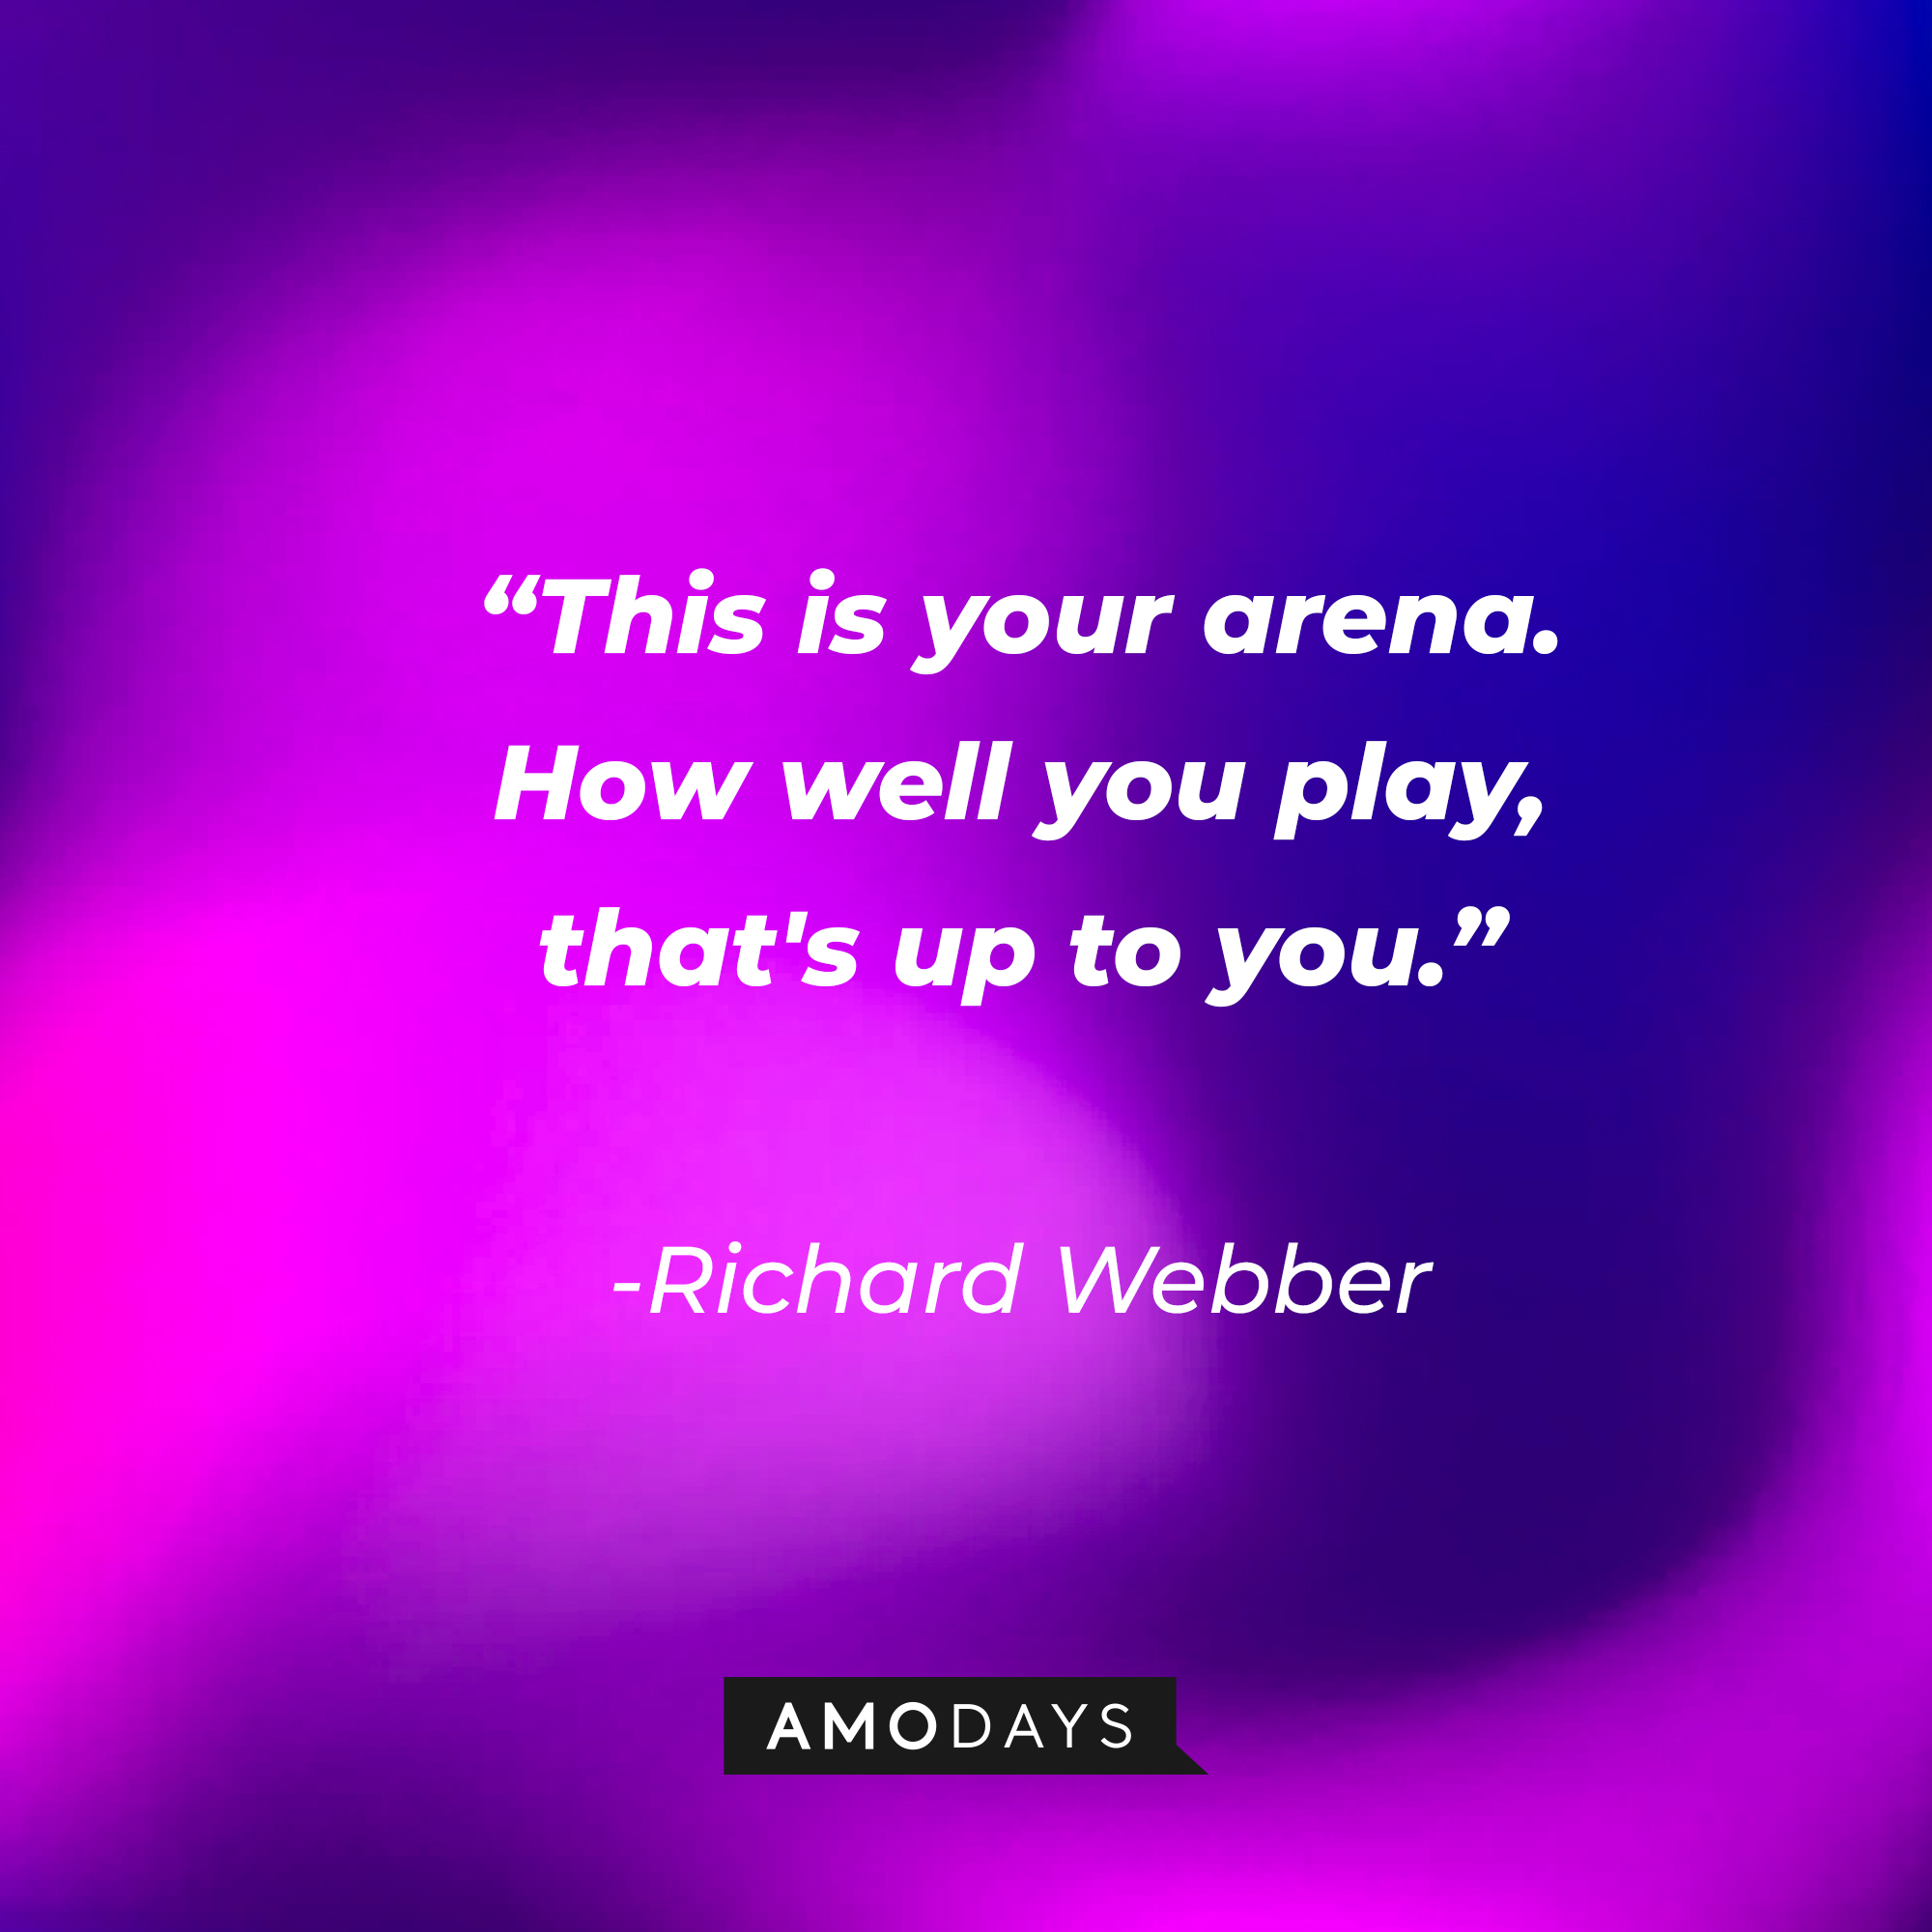 Richard Webber with his quote: "This is your arena. How well you play, that's up to you." | Source: Amodays